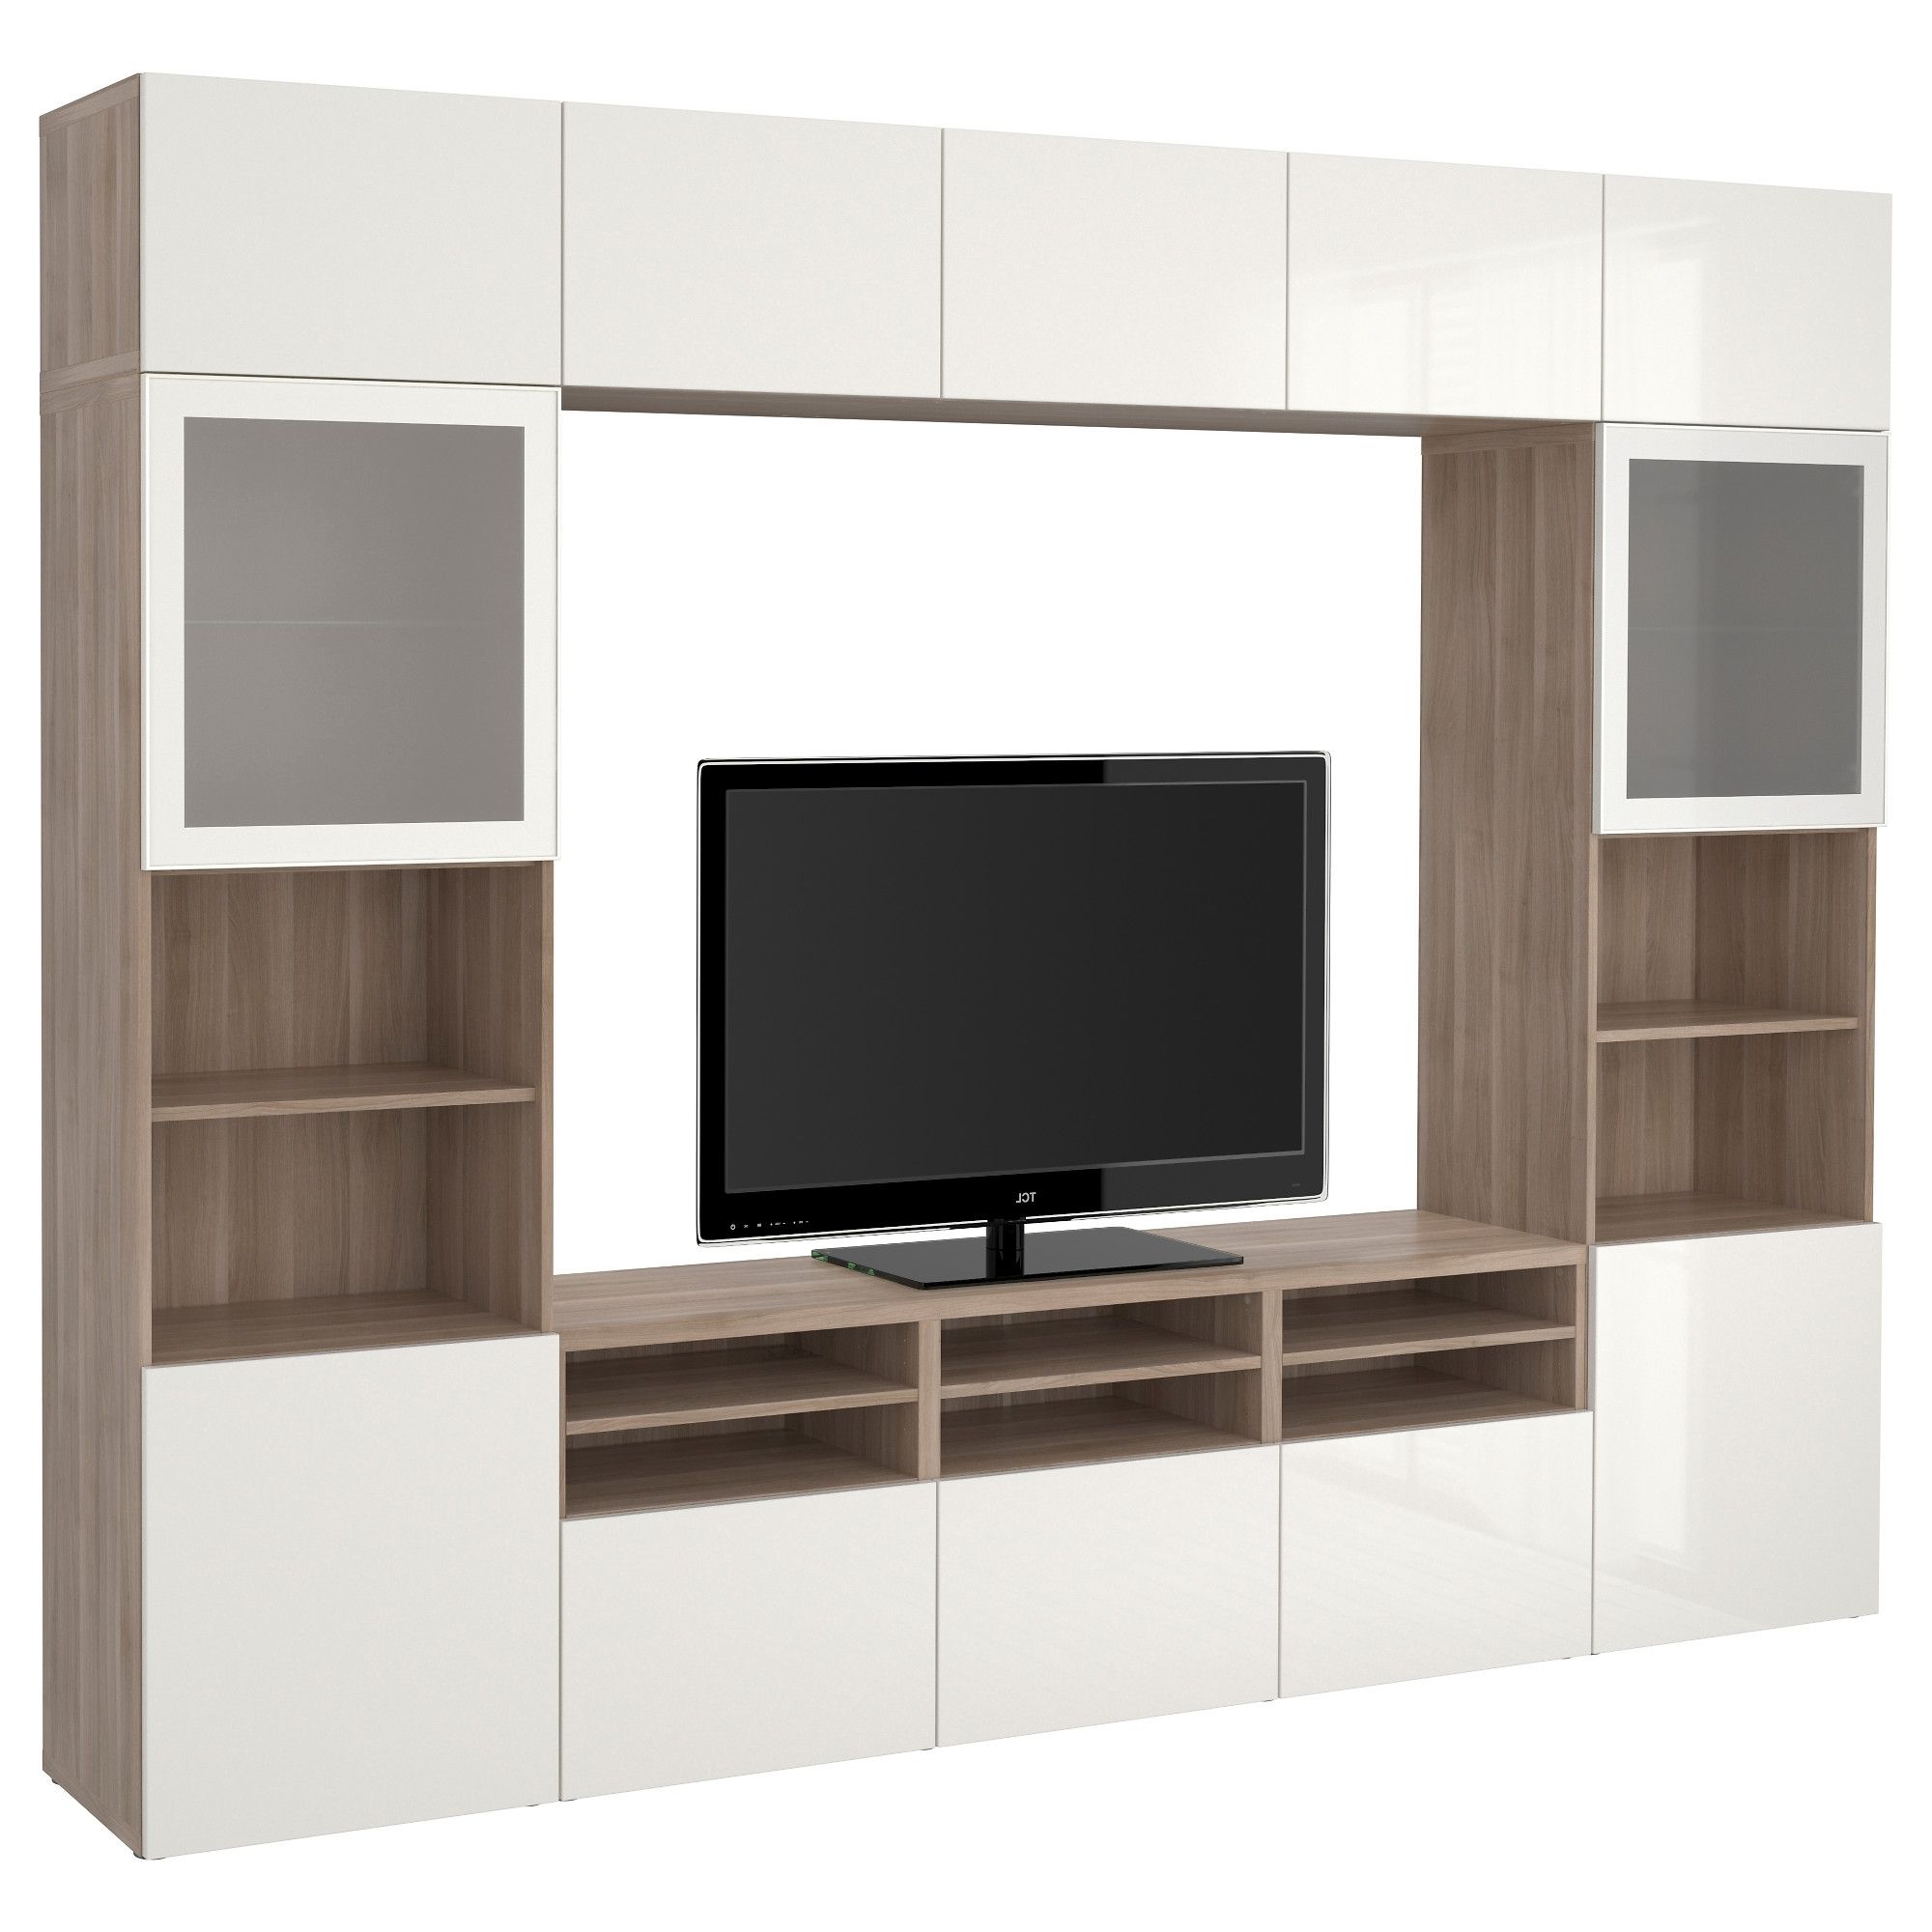 Tomnäs Tv Storage Unit Ikea Wall Units Hi Res Wallpaper Images Intended For Best And Newest Tv Storage Unit (View 11 of 15)